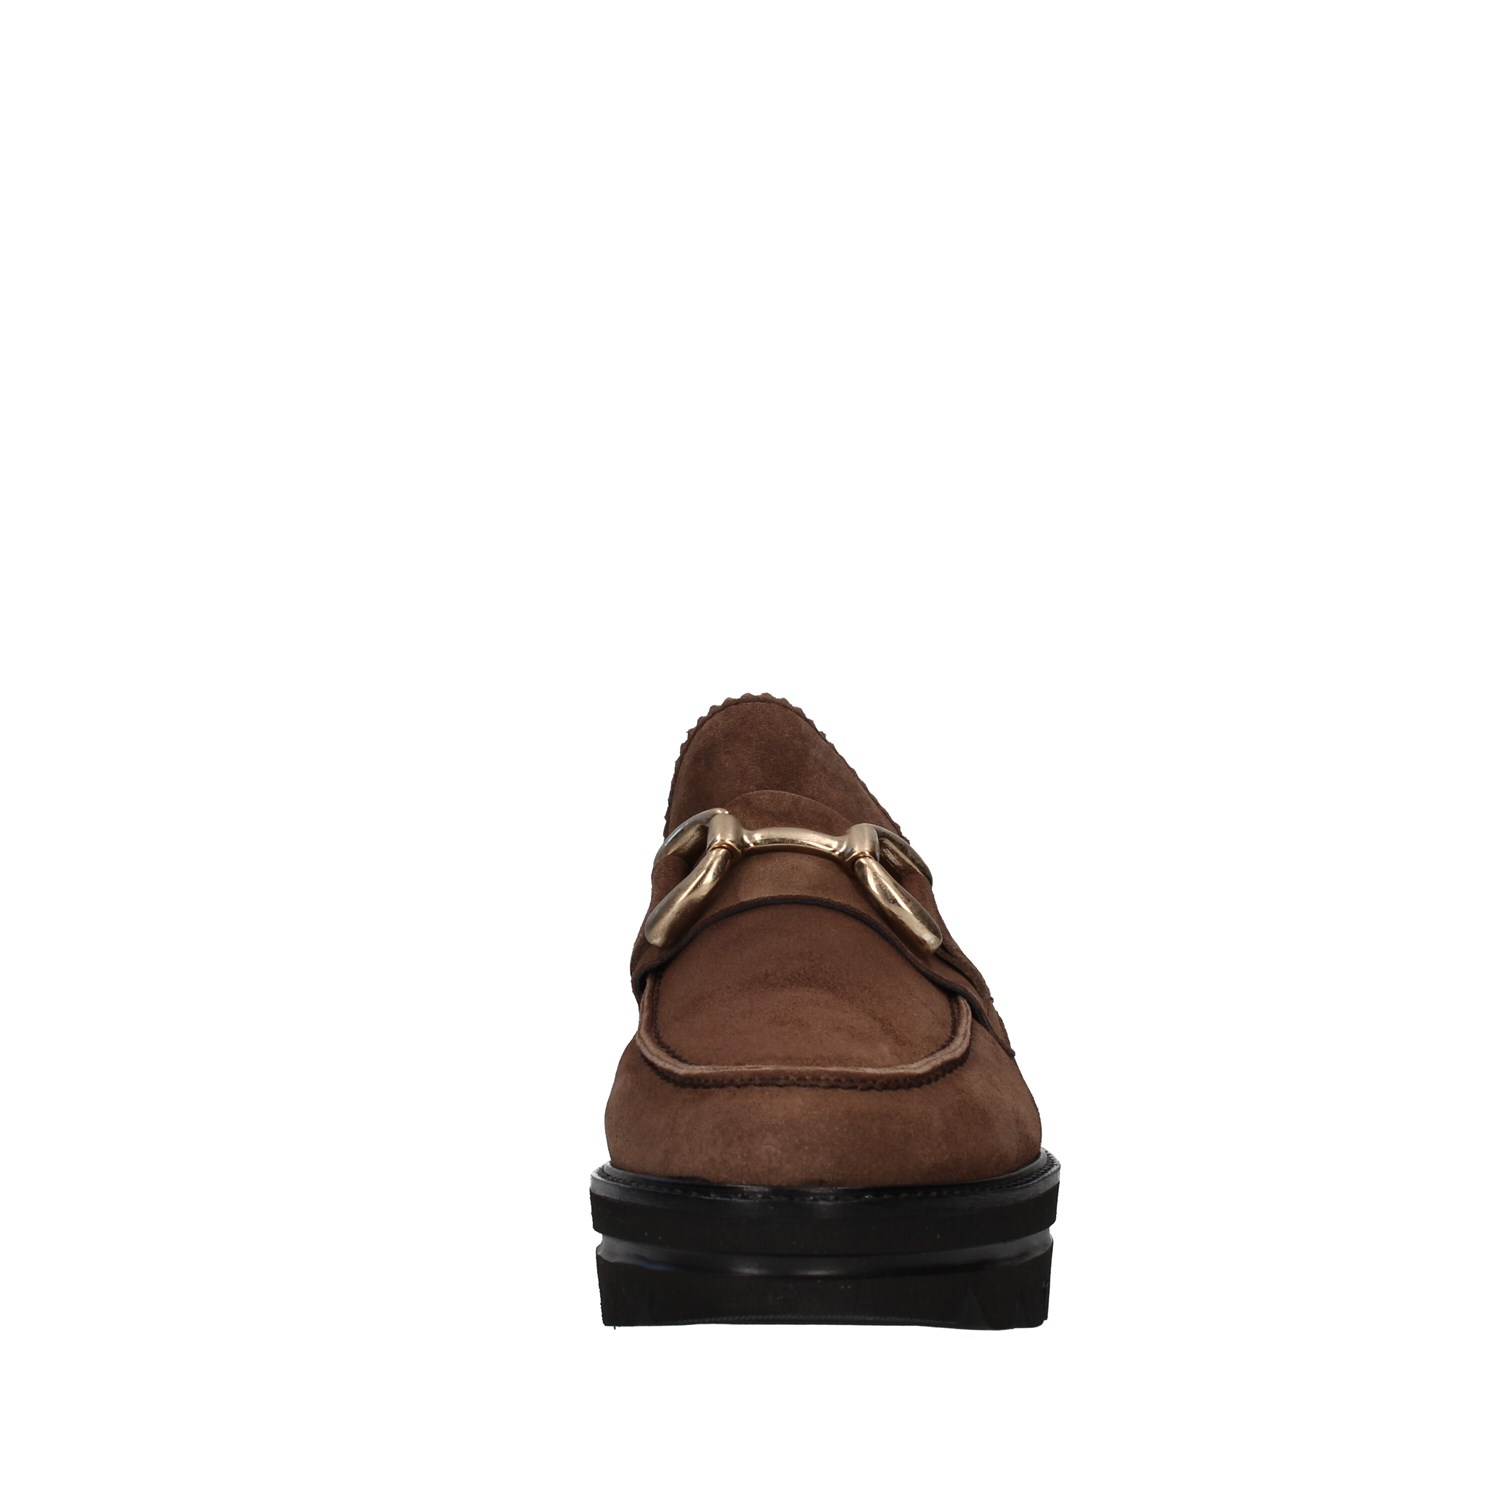 Callaghan 14854 BROWN Shoes Woman